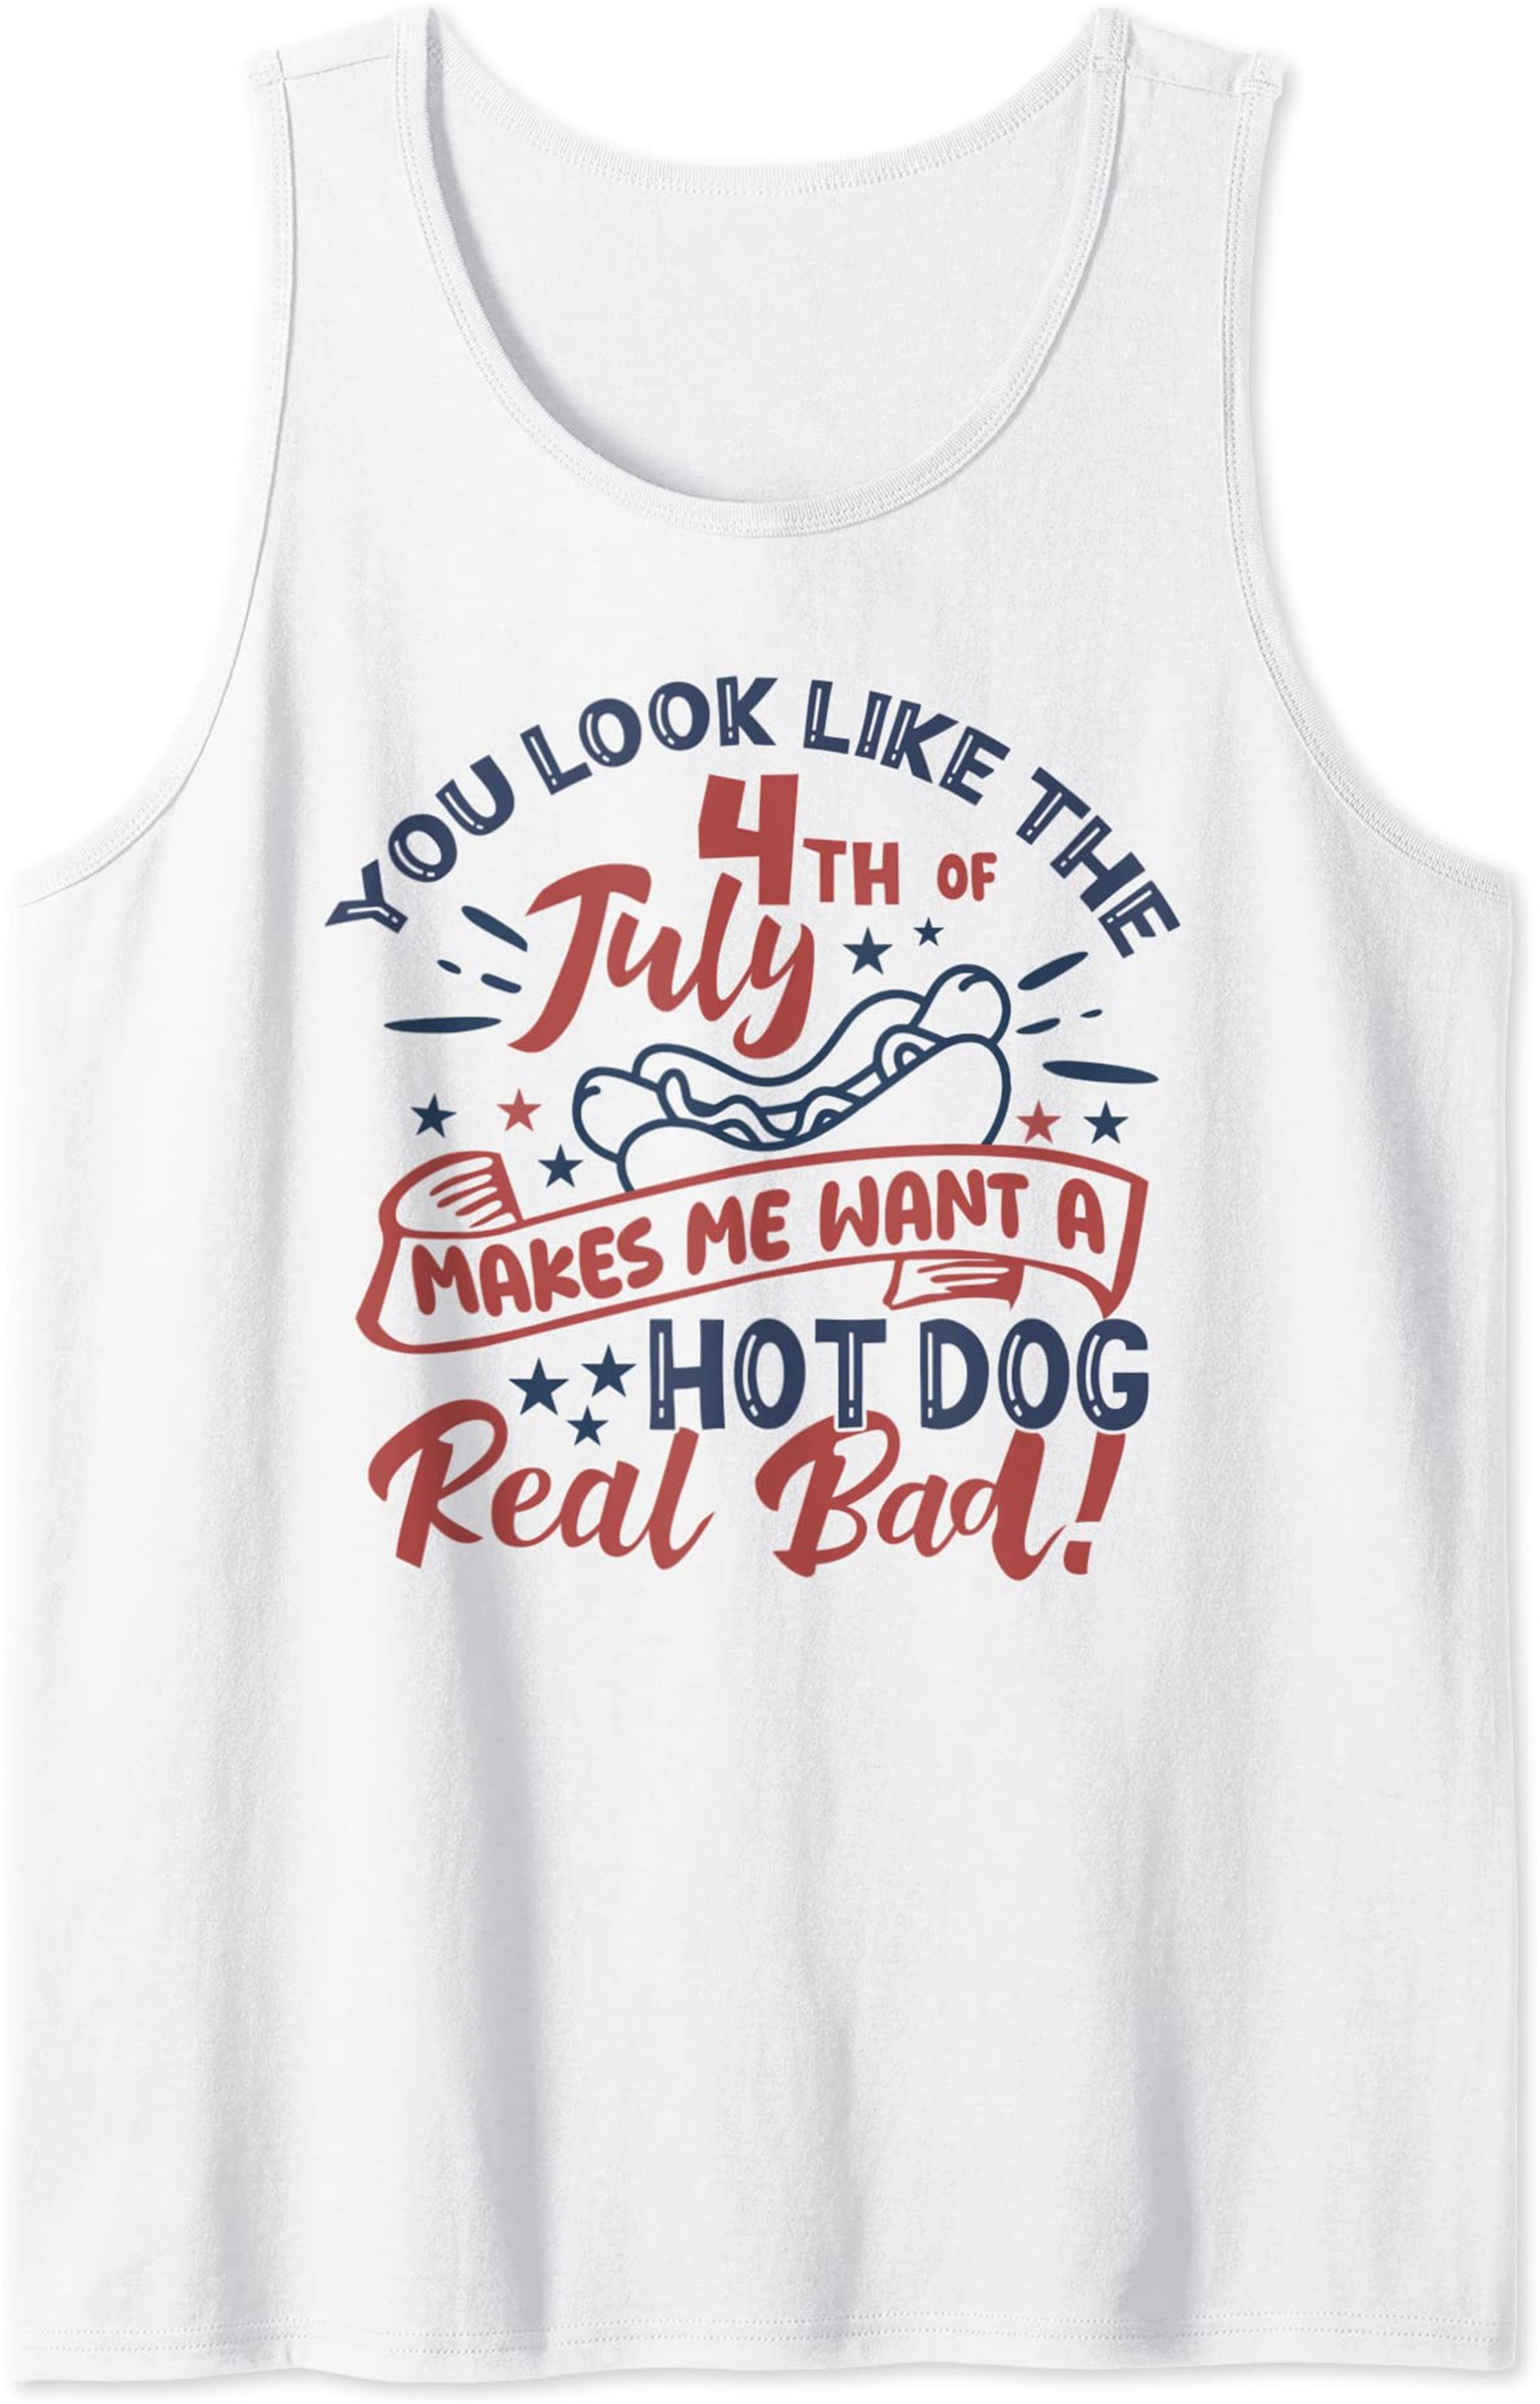 You Look Like The 4th Of July Shirt Tank Top Plus Size Up To 5xl